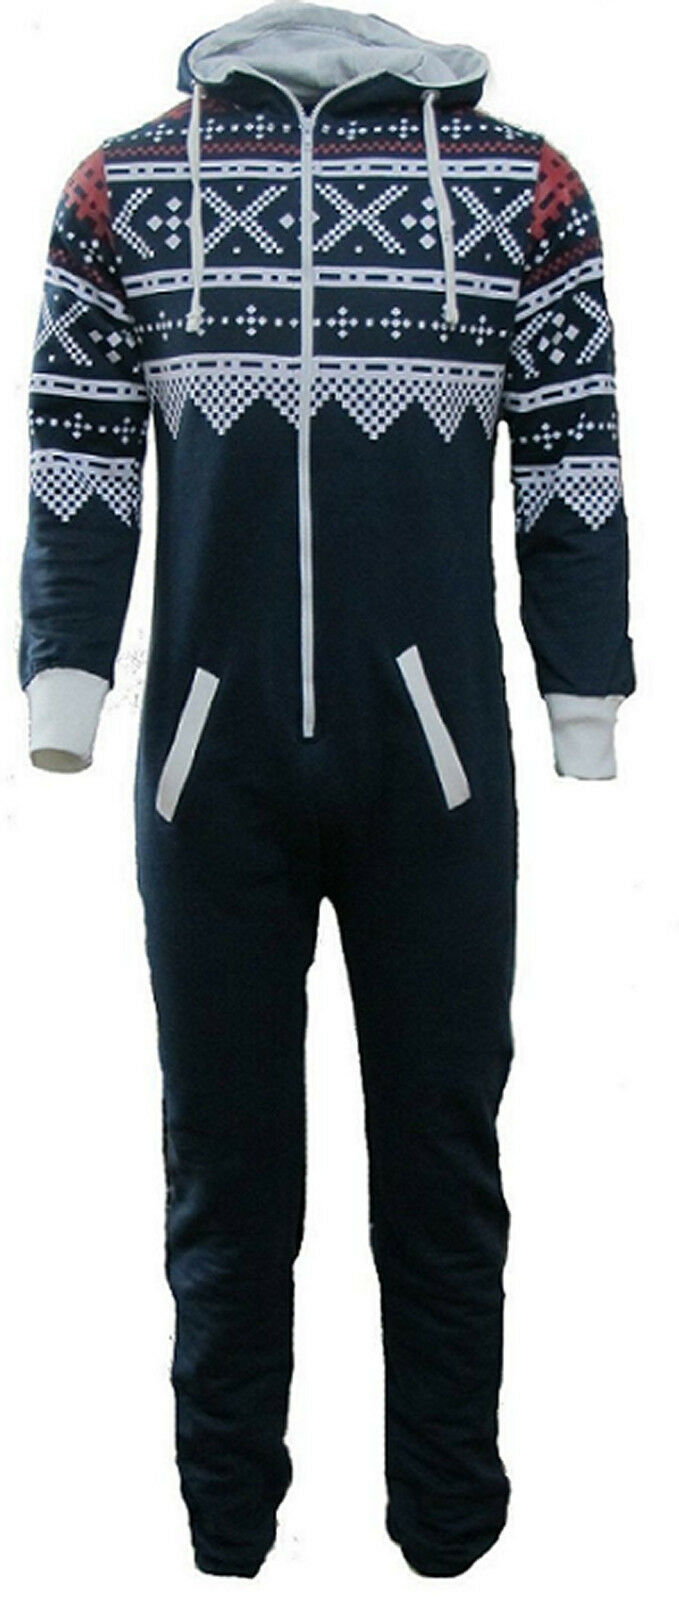 Adult Navy Aztec Design Onesie. Cotton Lined Hood With Fleece Lining In The Rest Of The Onesie. The Cuffs and Ankles Are Ribbed Elastic. These Are To Be Worn Loosely. Sizes Small To X- Large.